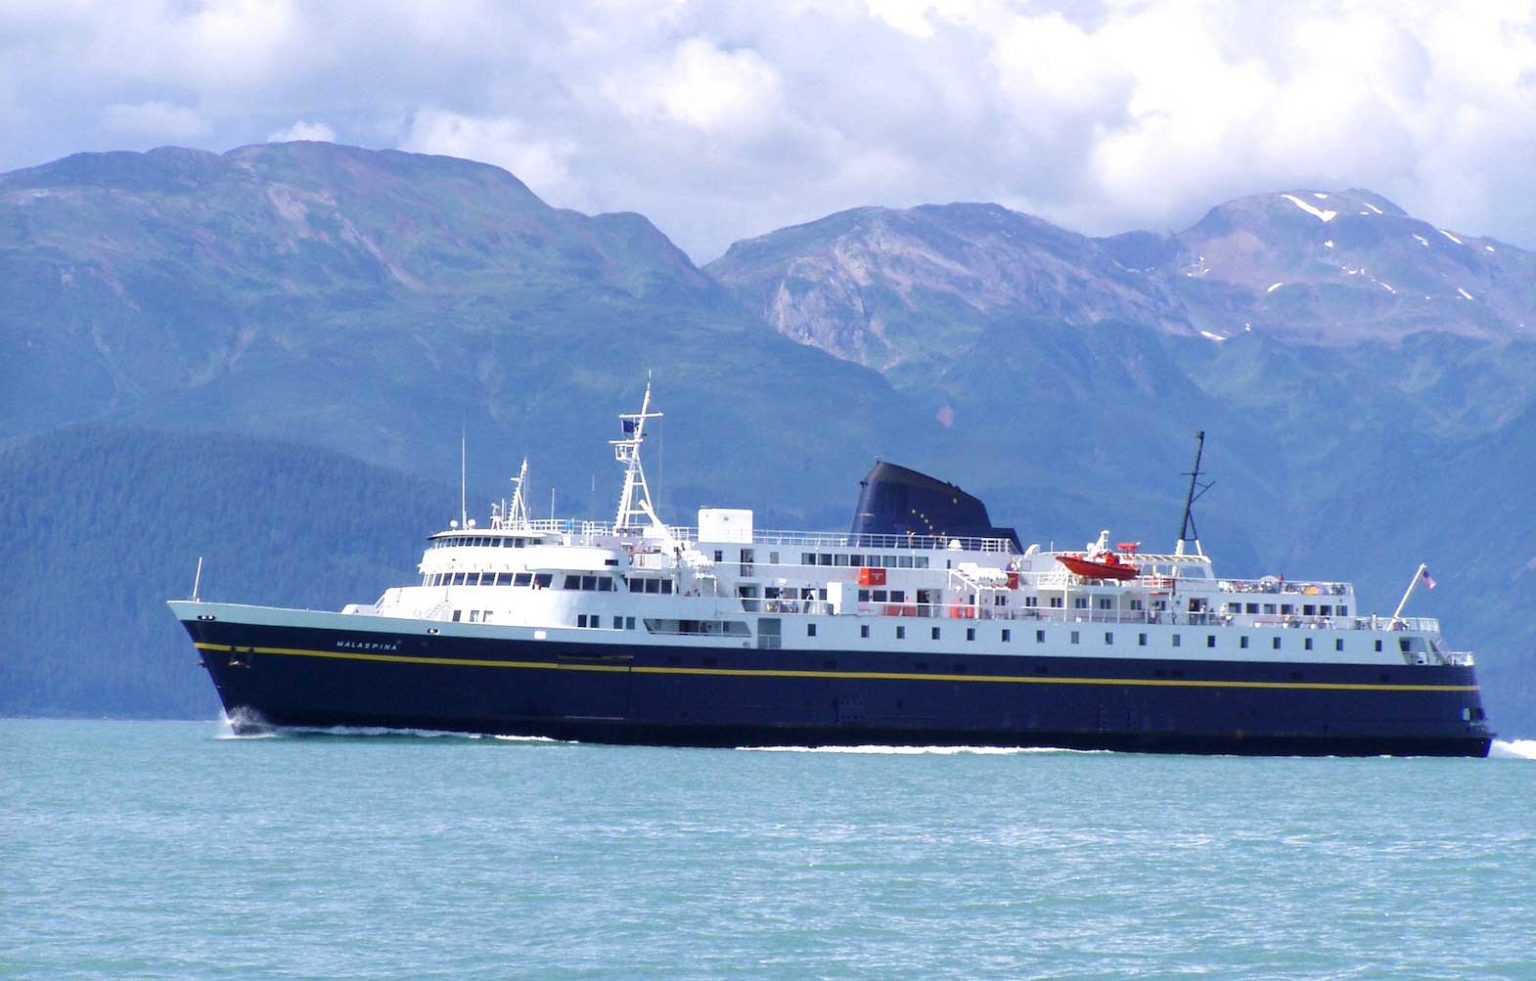 Alaska offers PH a 58-year-old ferry for free